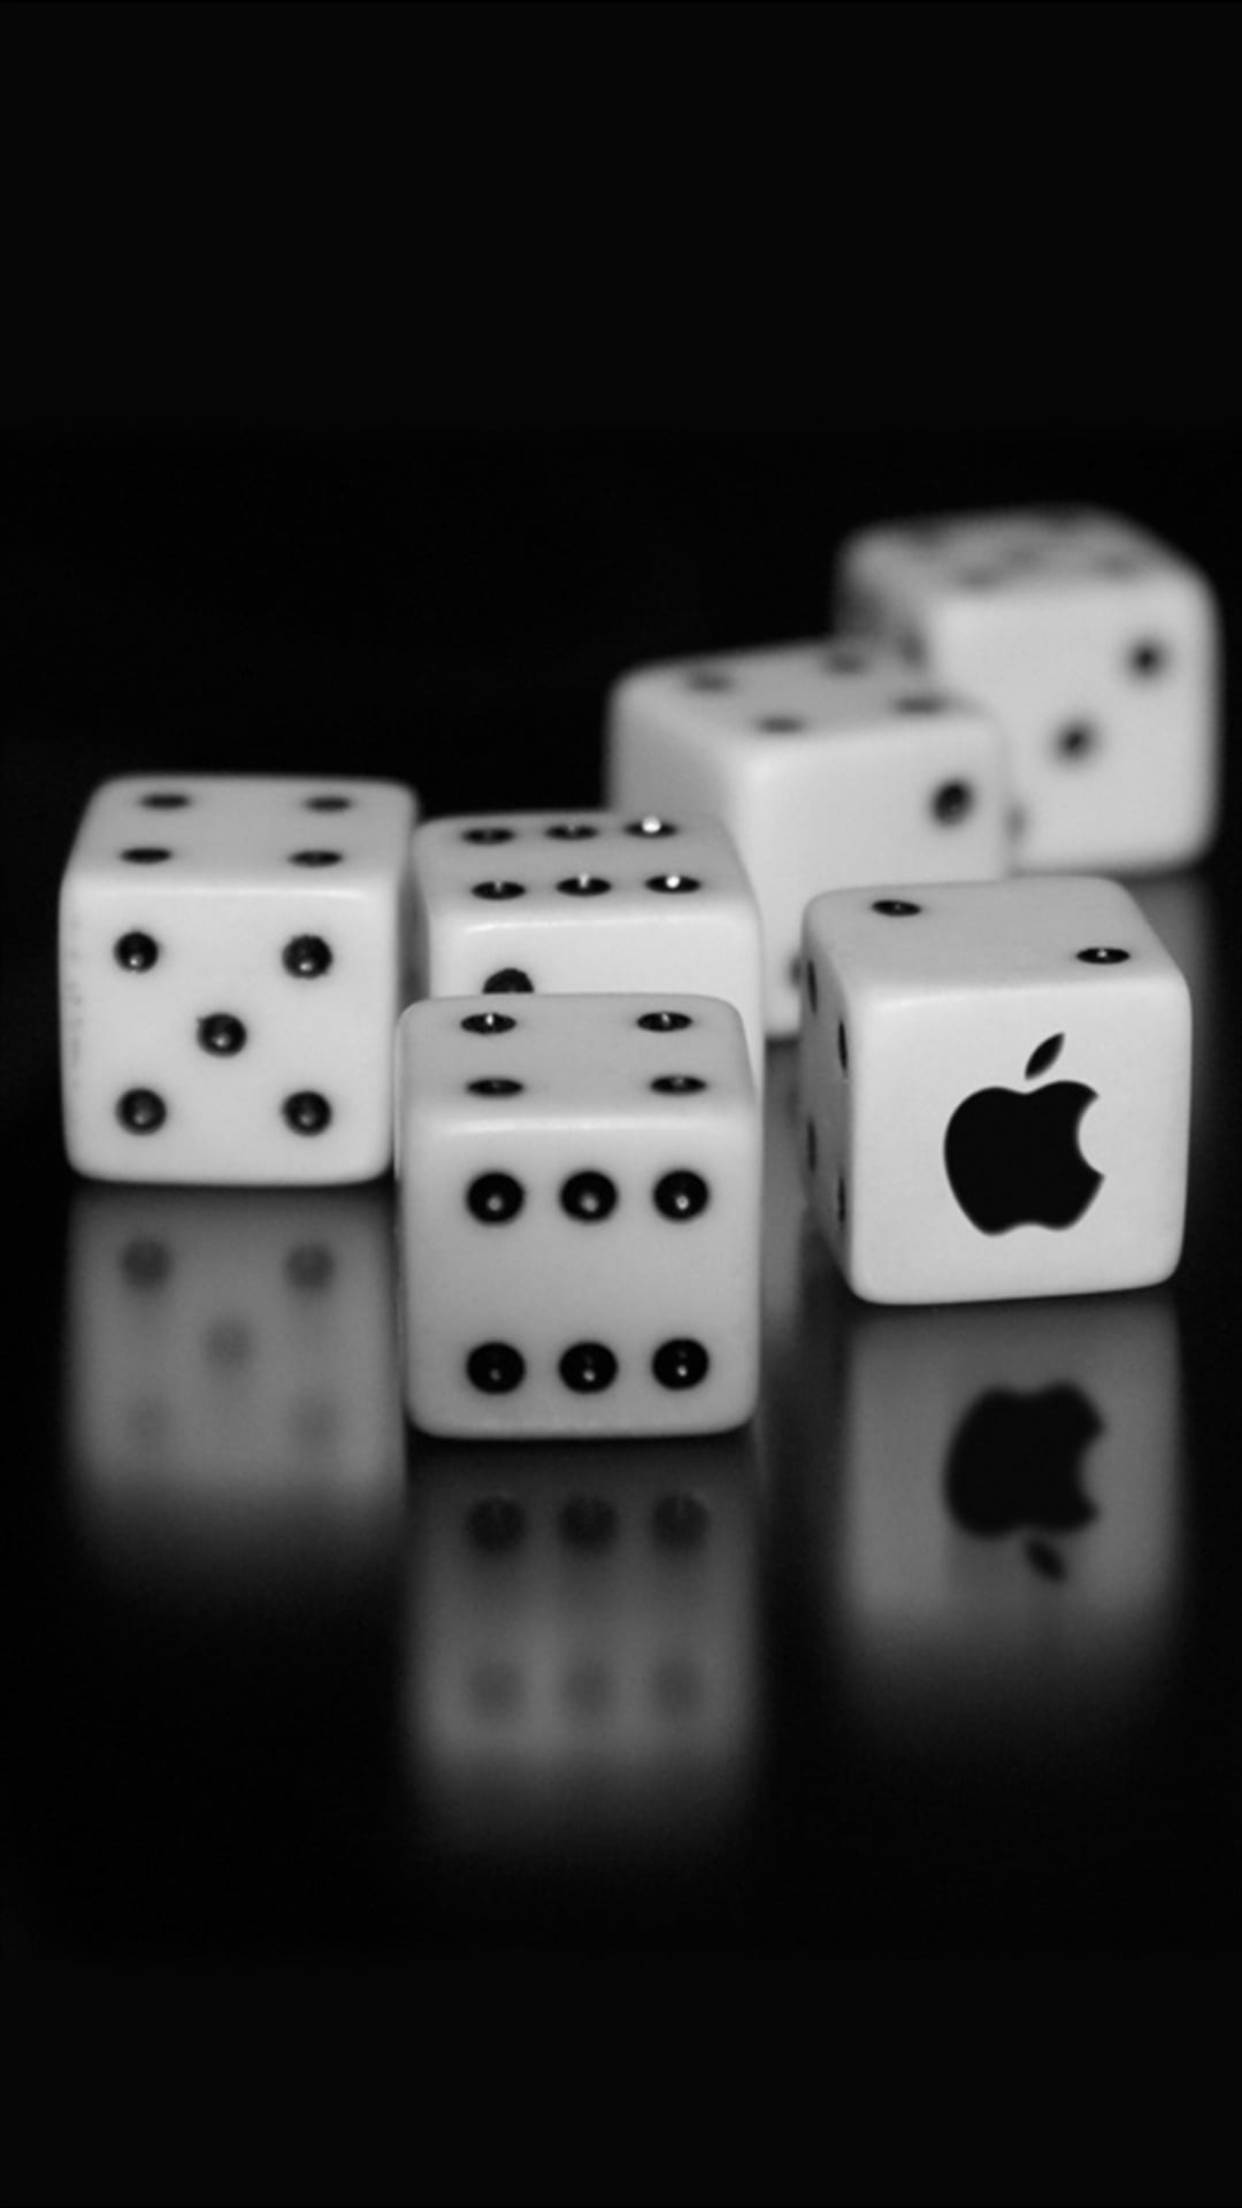 Stylish Black iPhone 6 Plus with White Dice Display Wallpaper Wallpaper